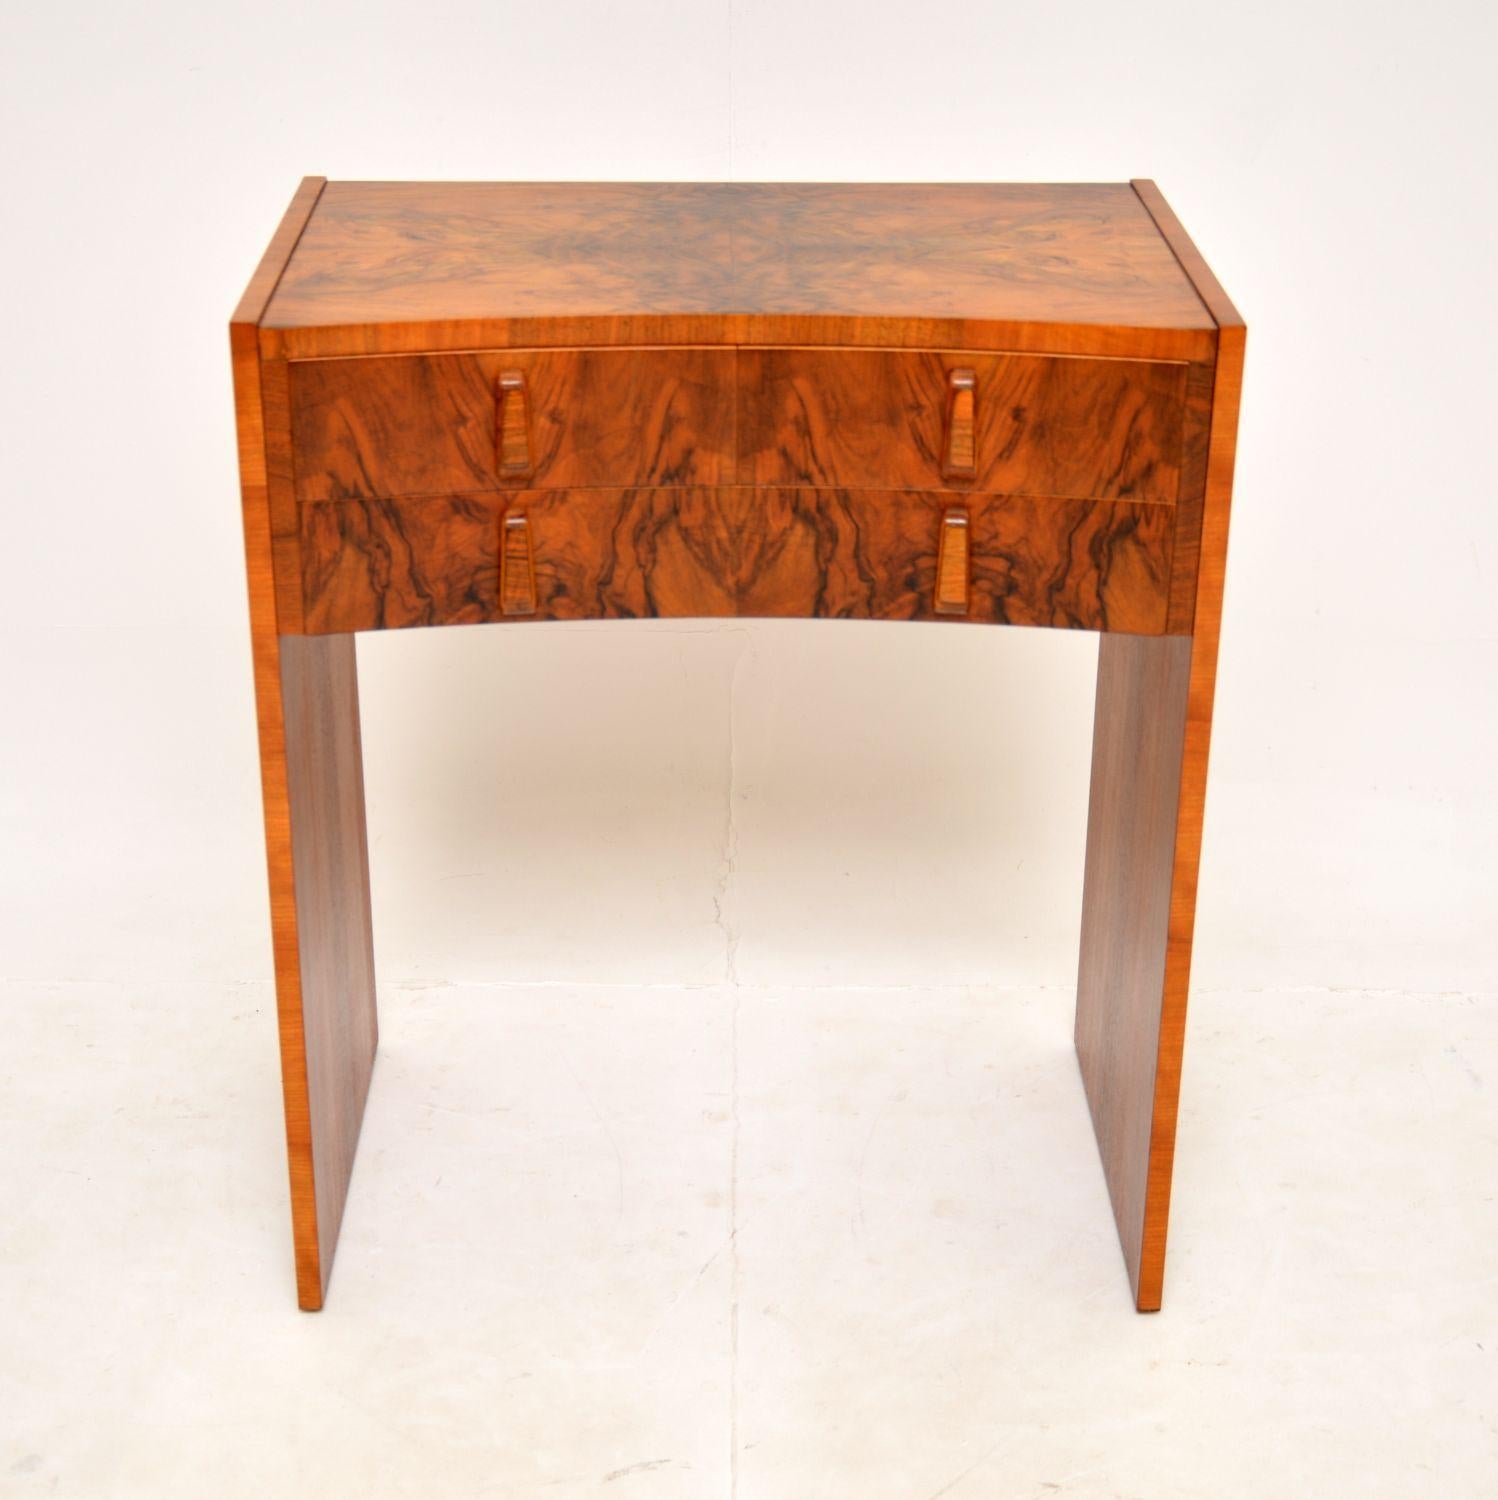 A beautiful and very well made Art Deco side table in walnut. This was made in England, it dates from around the 1930’s.

It’s of great quality and is very useful size. This would be perfect for use as a console/side table or even as a dressing